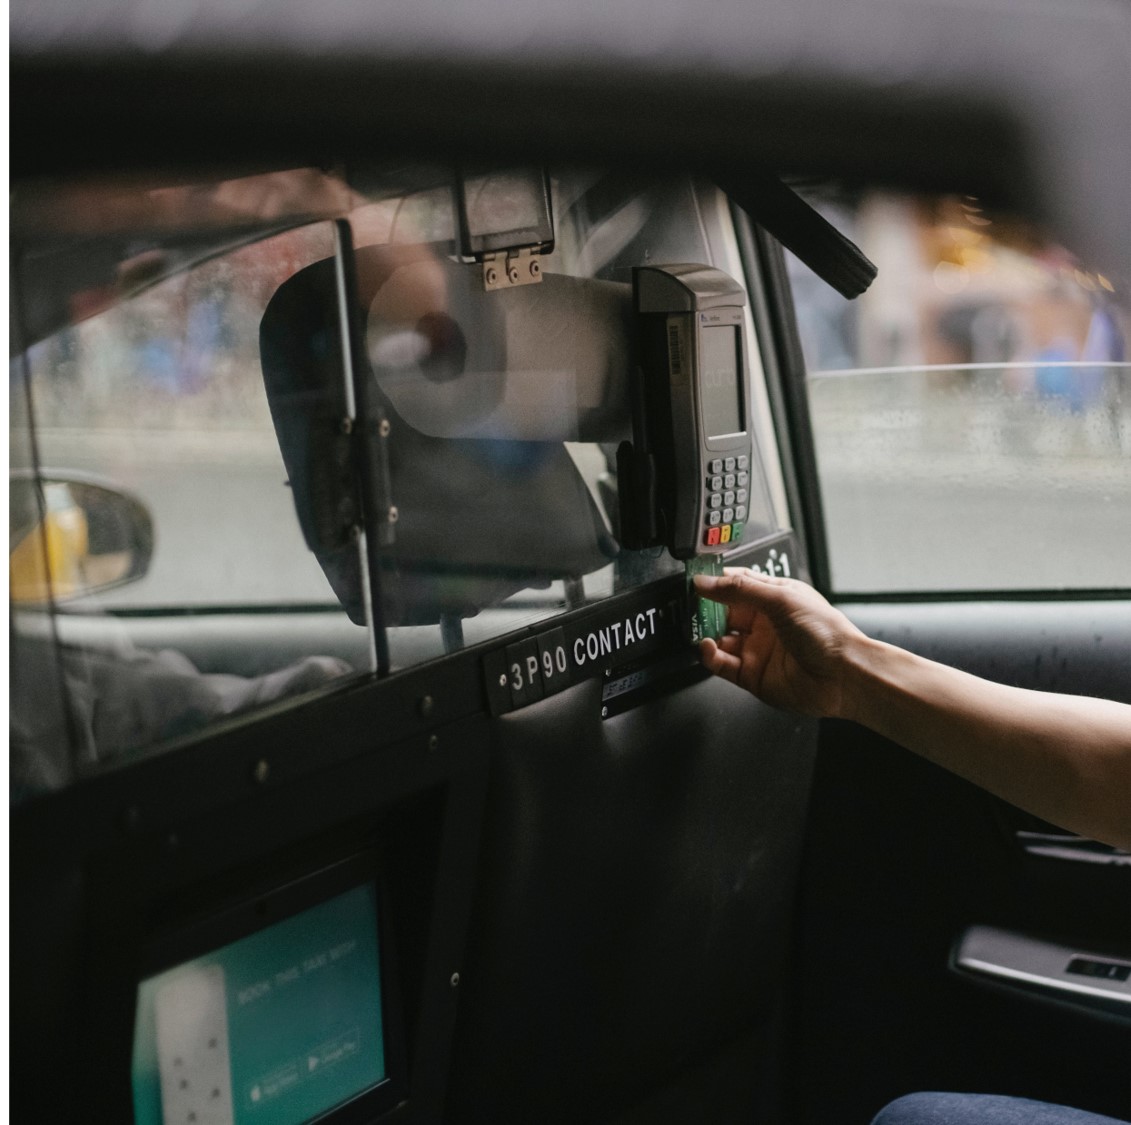 Payment processing machine in a taxi